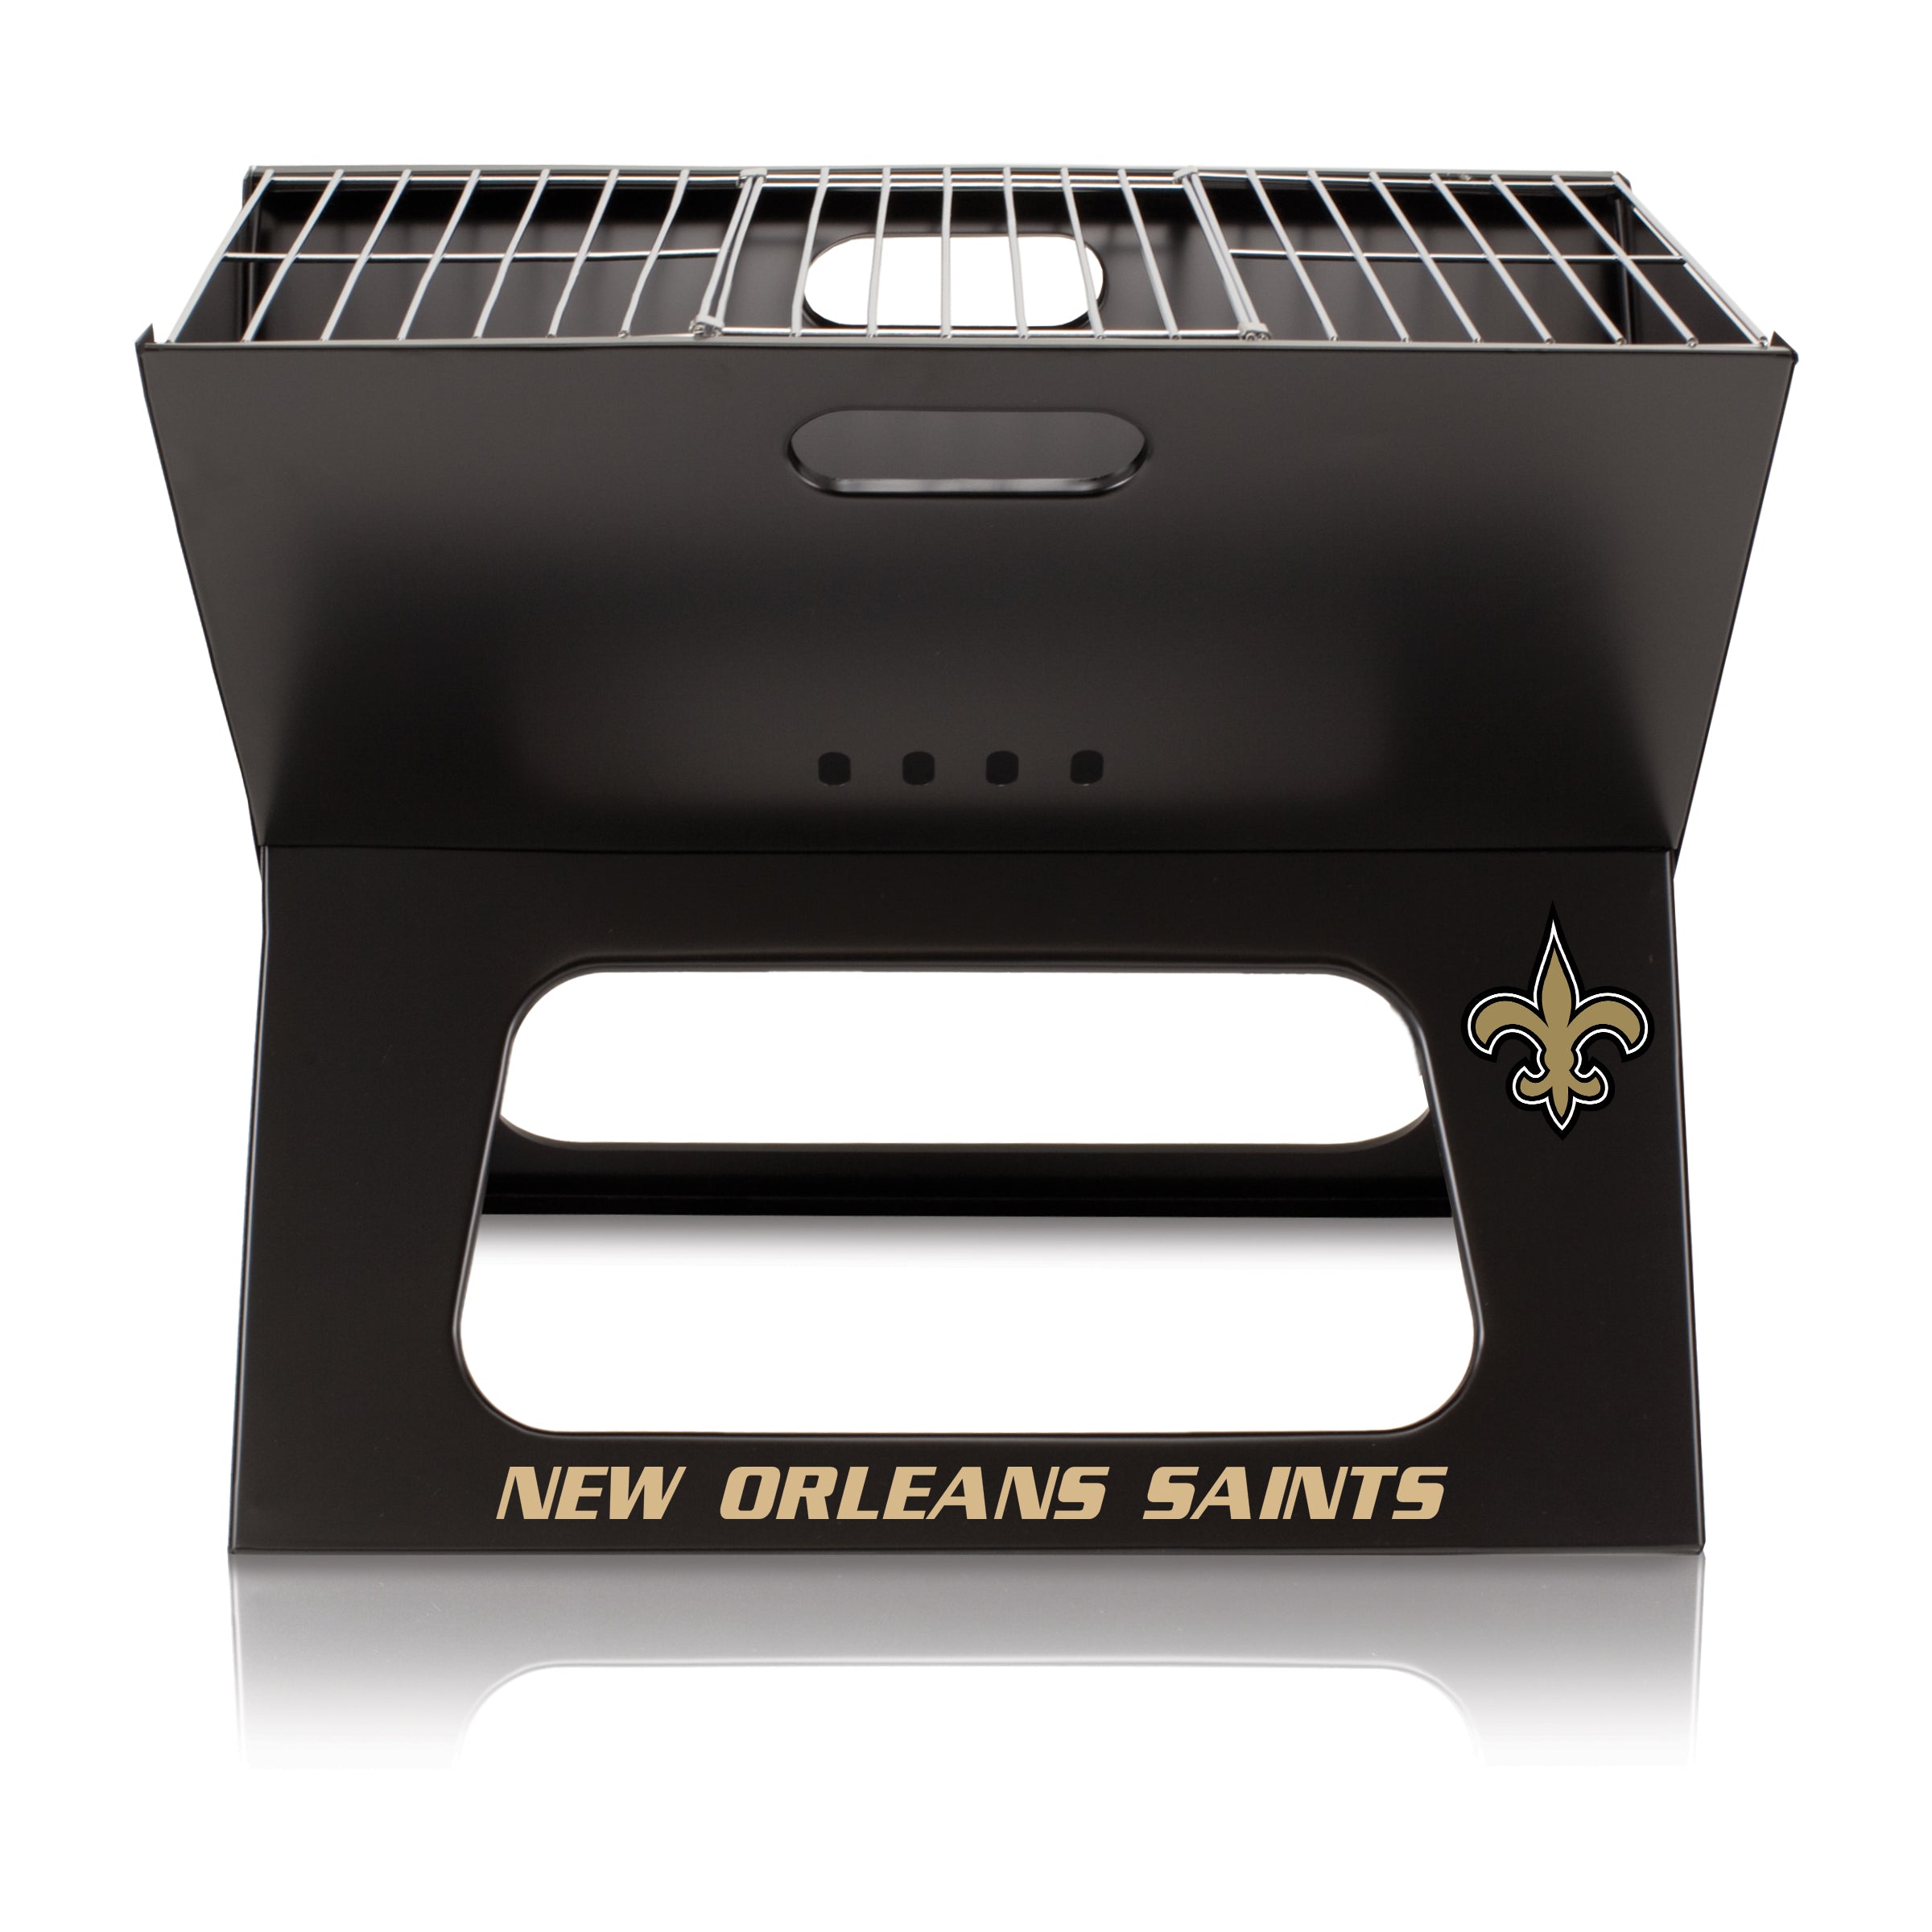 New Orleans Saints - X-Grill Portable Charcoal BBQ Grill